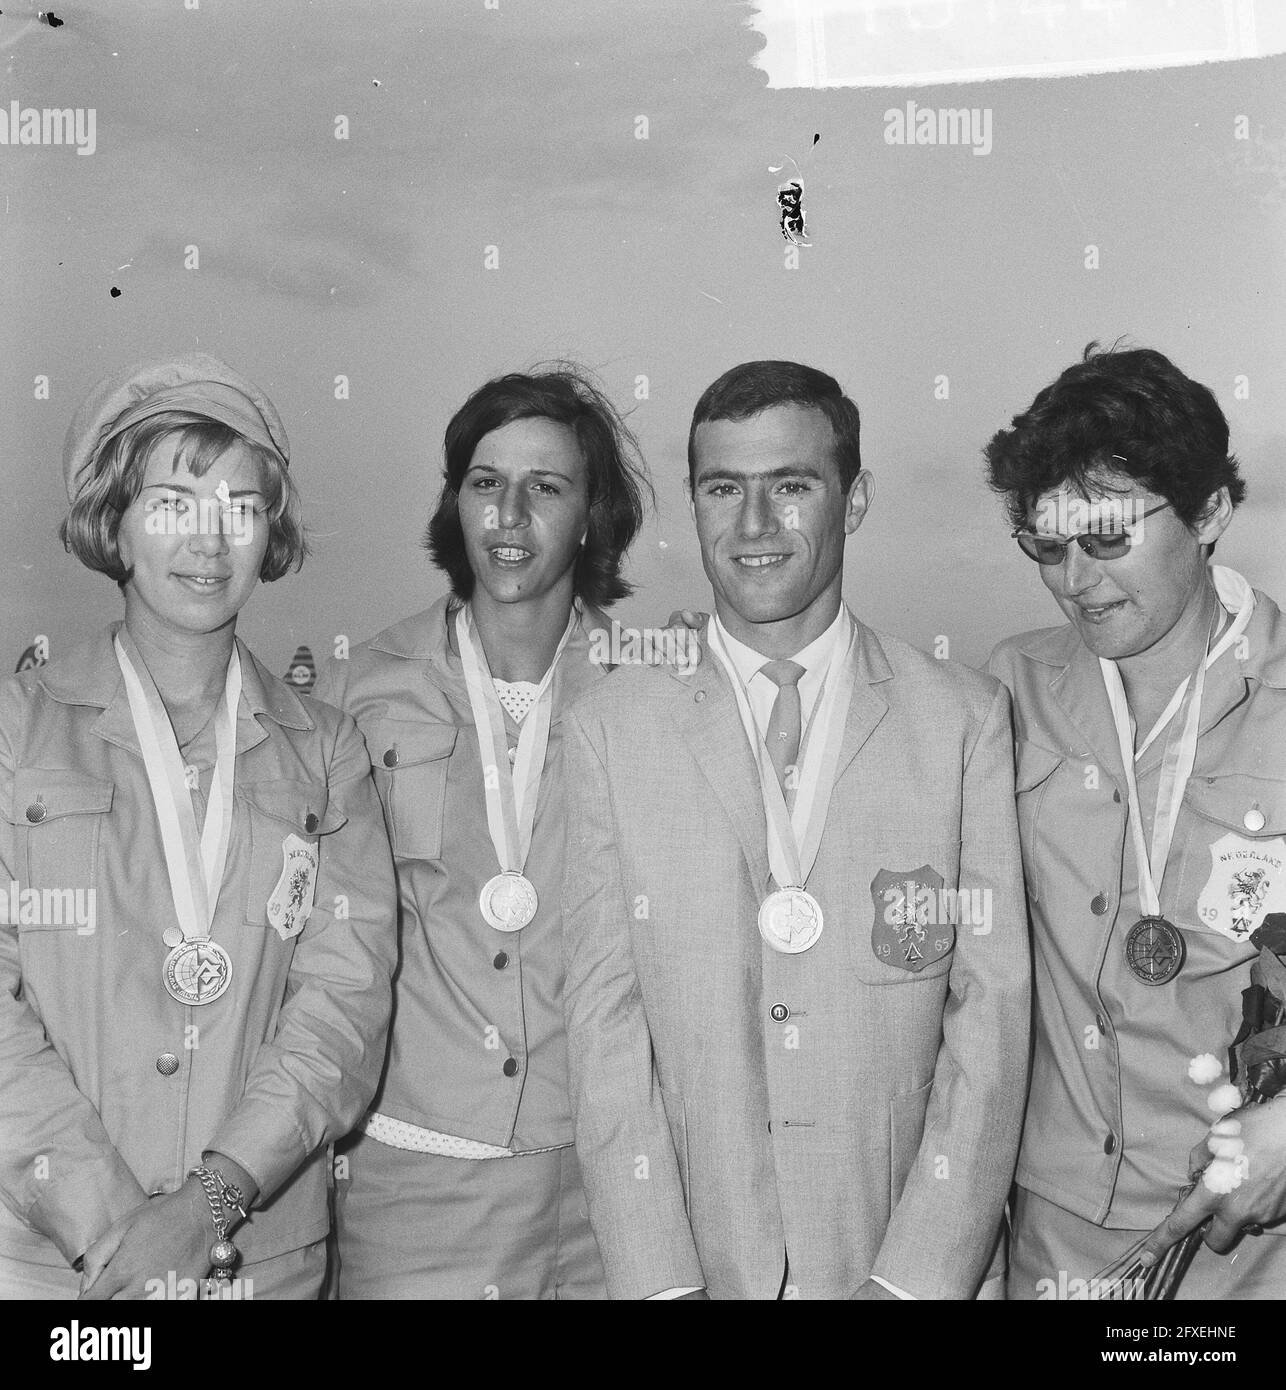 Back from Israel from the Maccabiade, from left to right Ineke van Wezel, Carry Piller, Rob Redeker and Selma Heijstek (all gold), September 5, 1965, arrivals, The Netherlands, 20th century press agency photo, news to remember, documentary, historic photography 1945-1990, visual stories, human history of the Twentieth Century, capturing moments in time Stock Photo